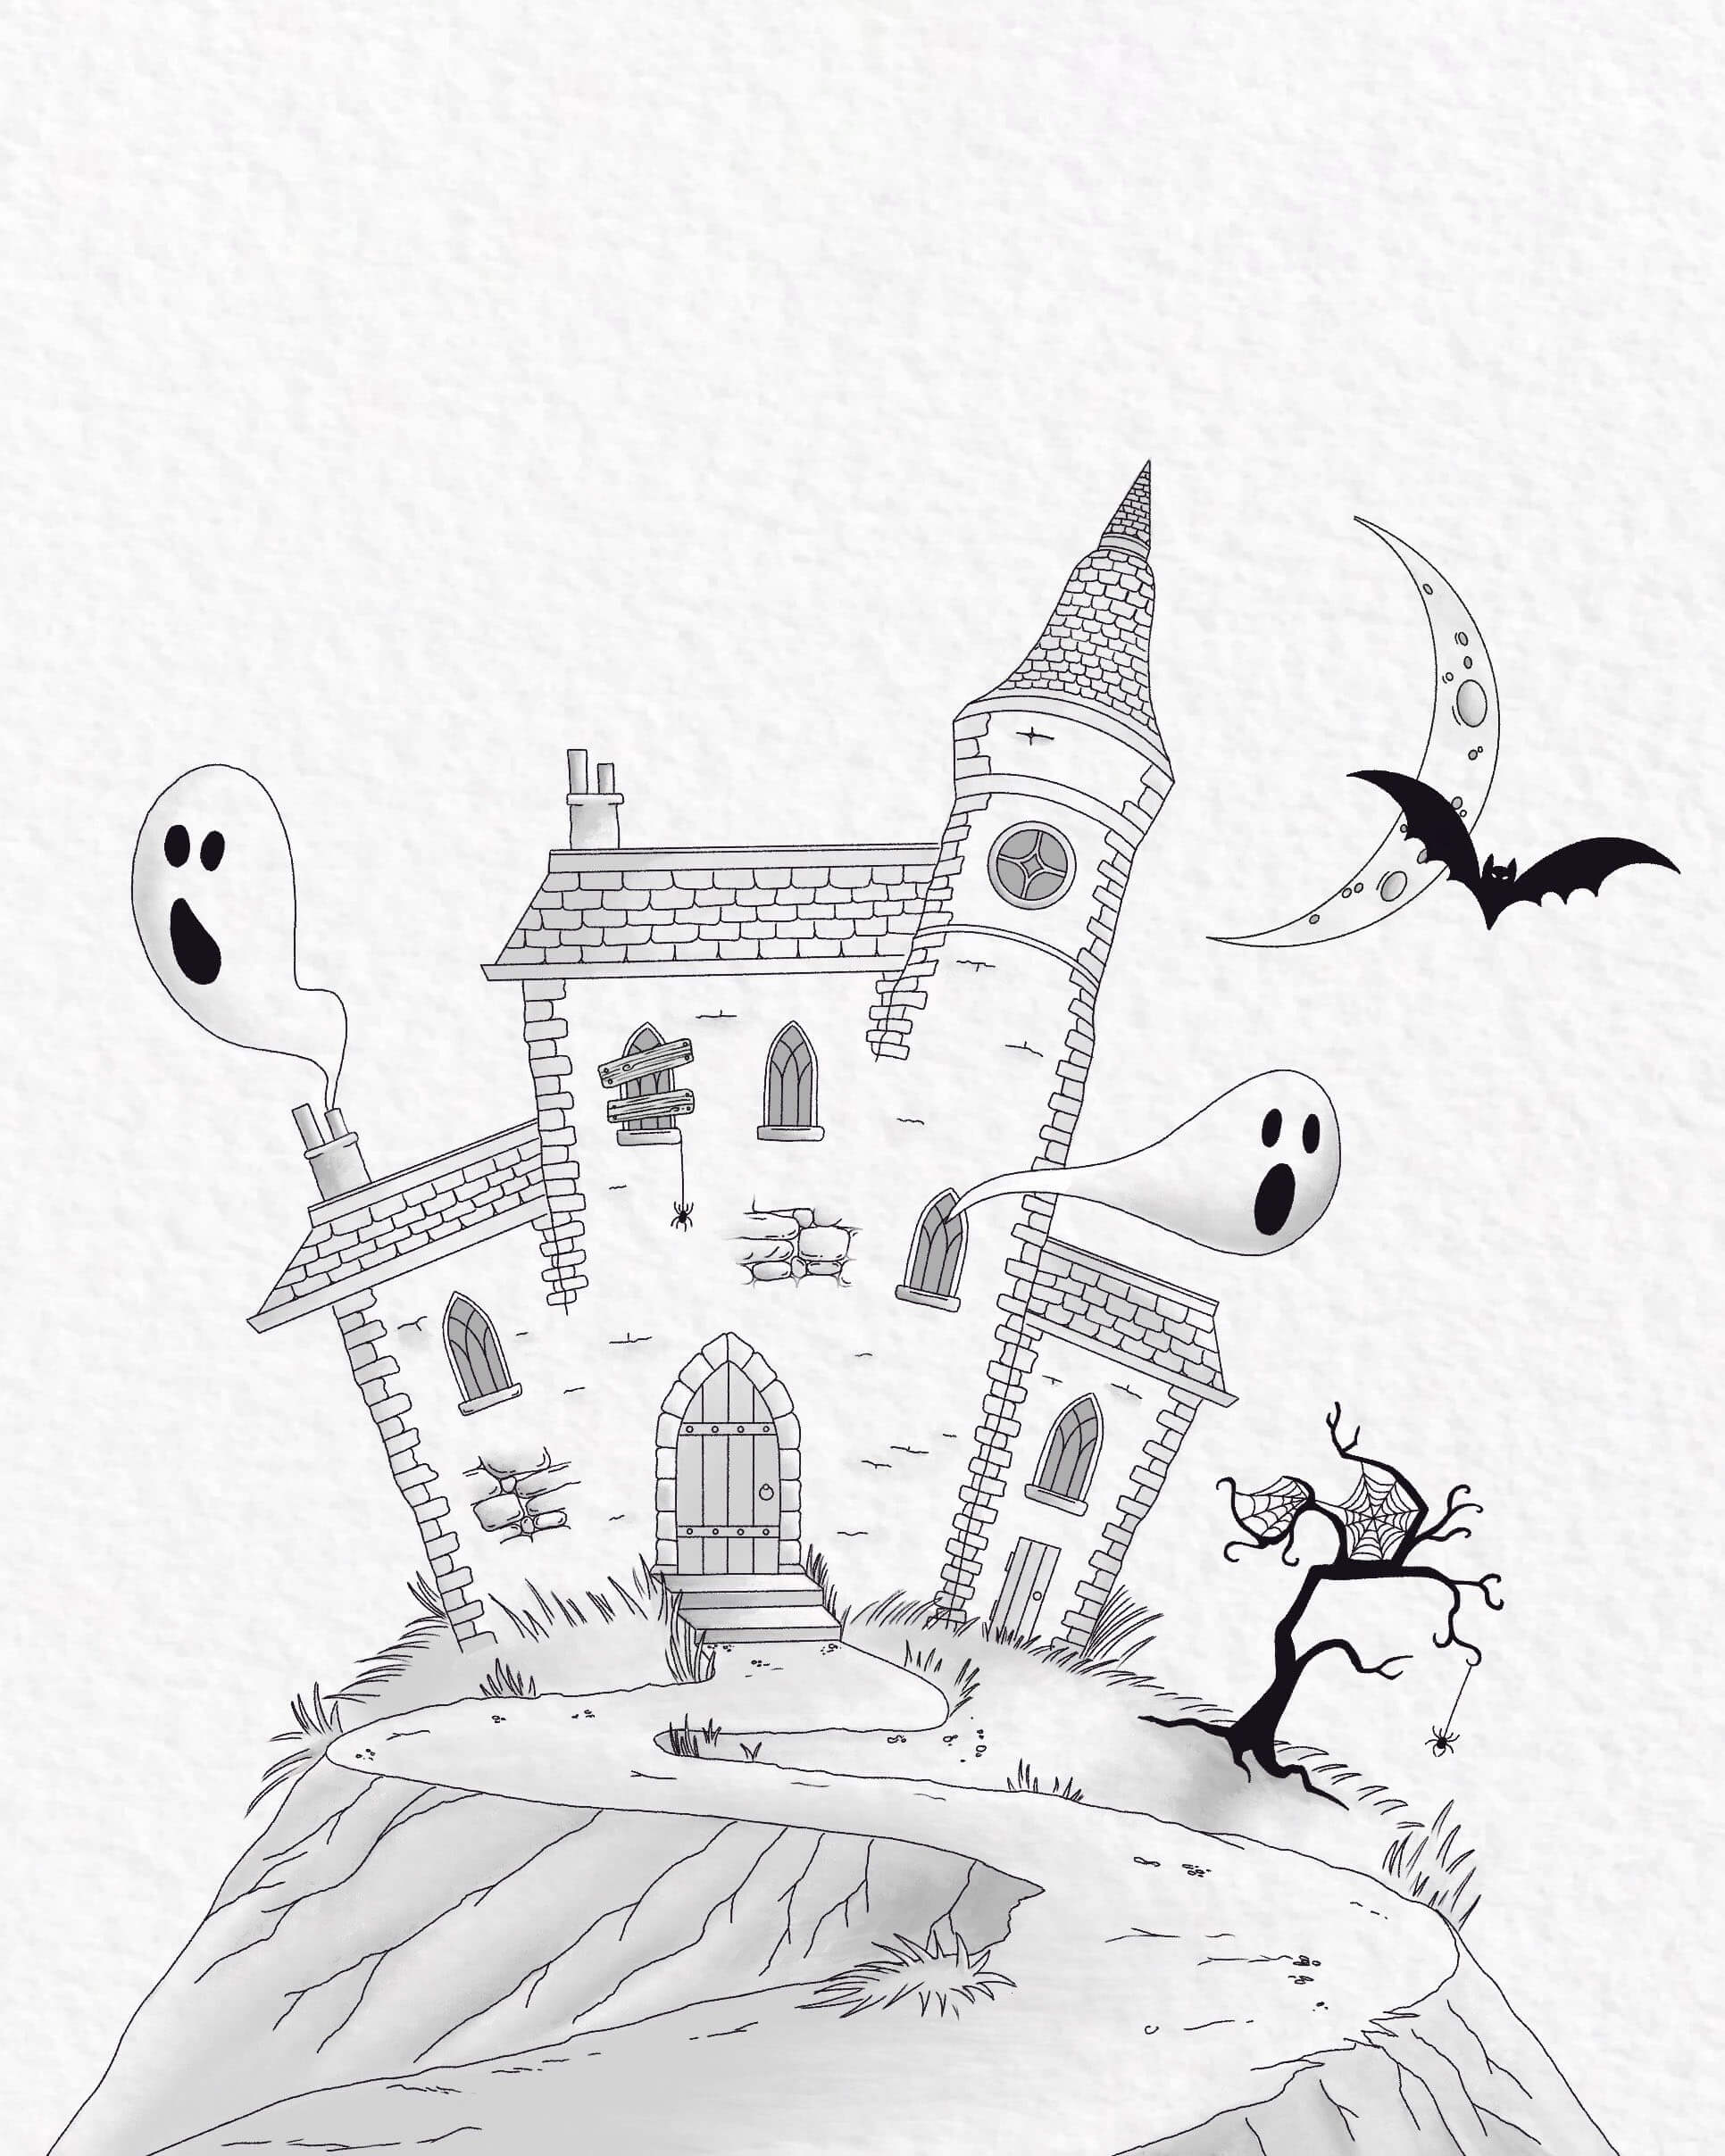 How to draw a haunted house